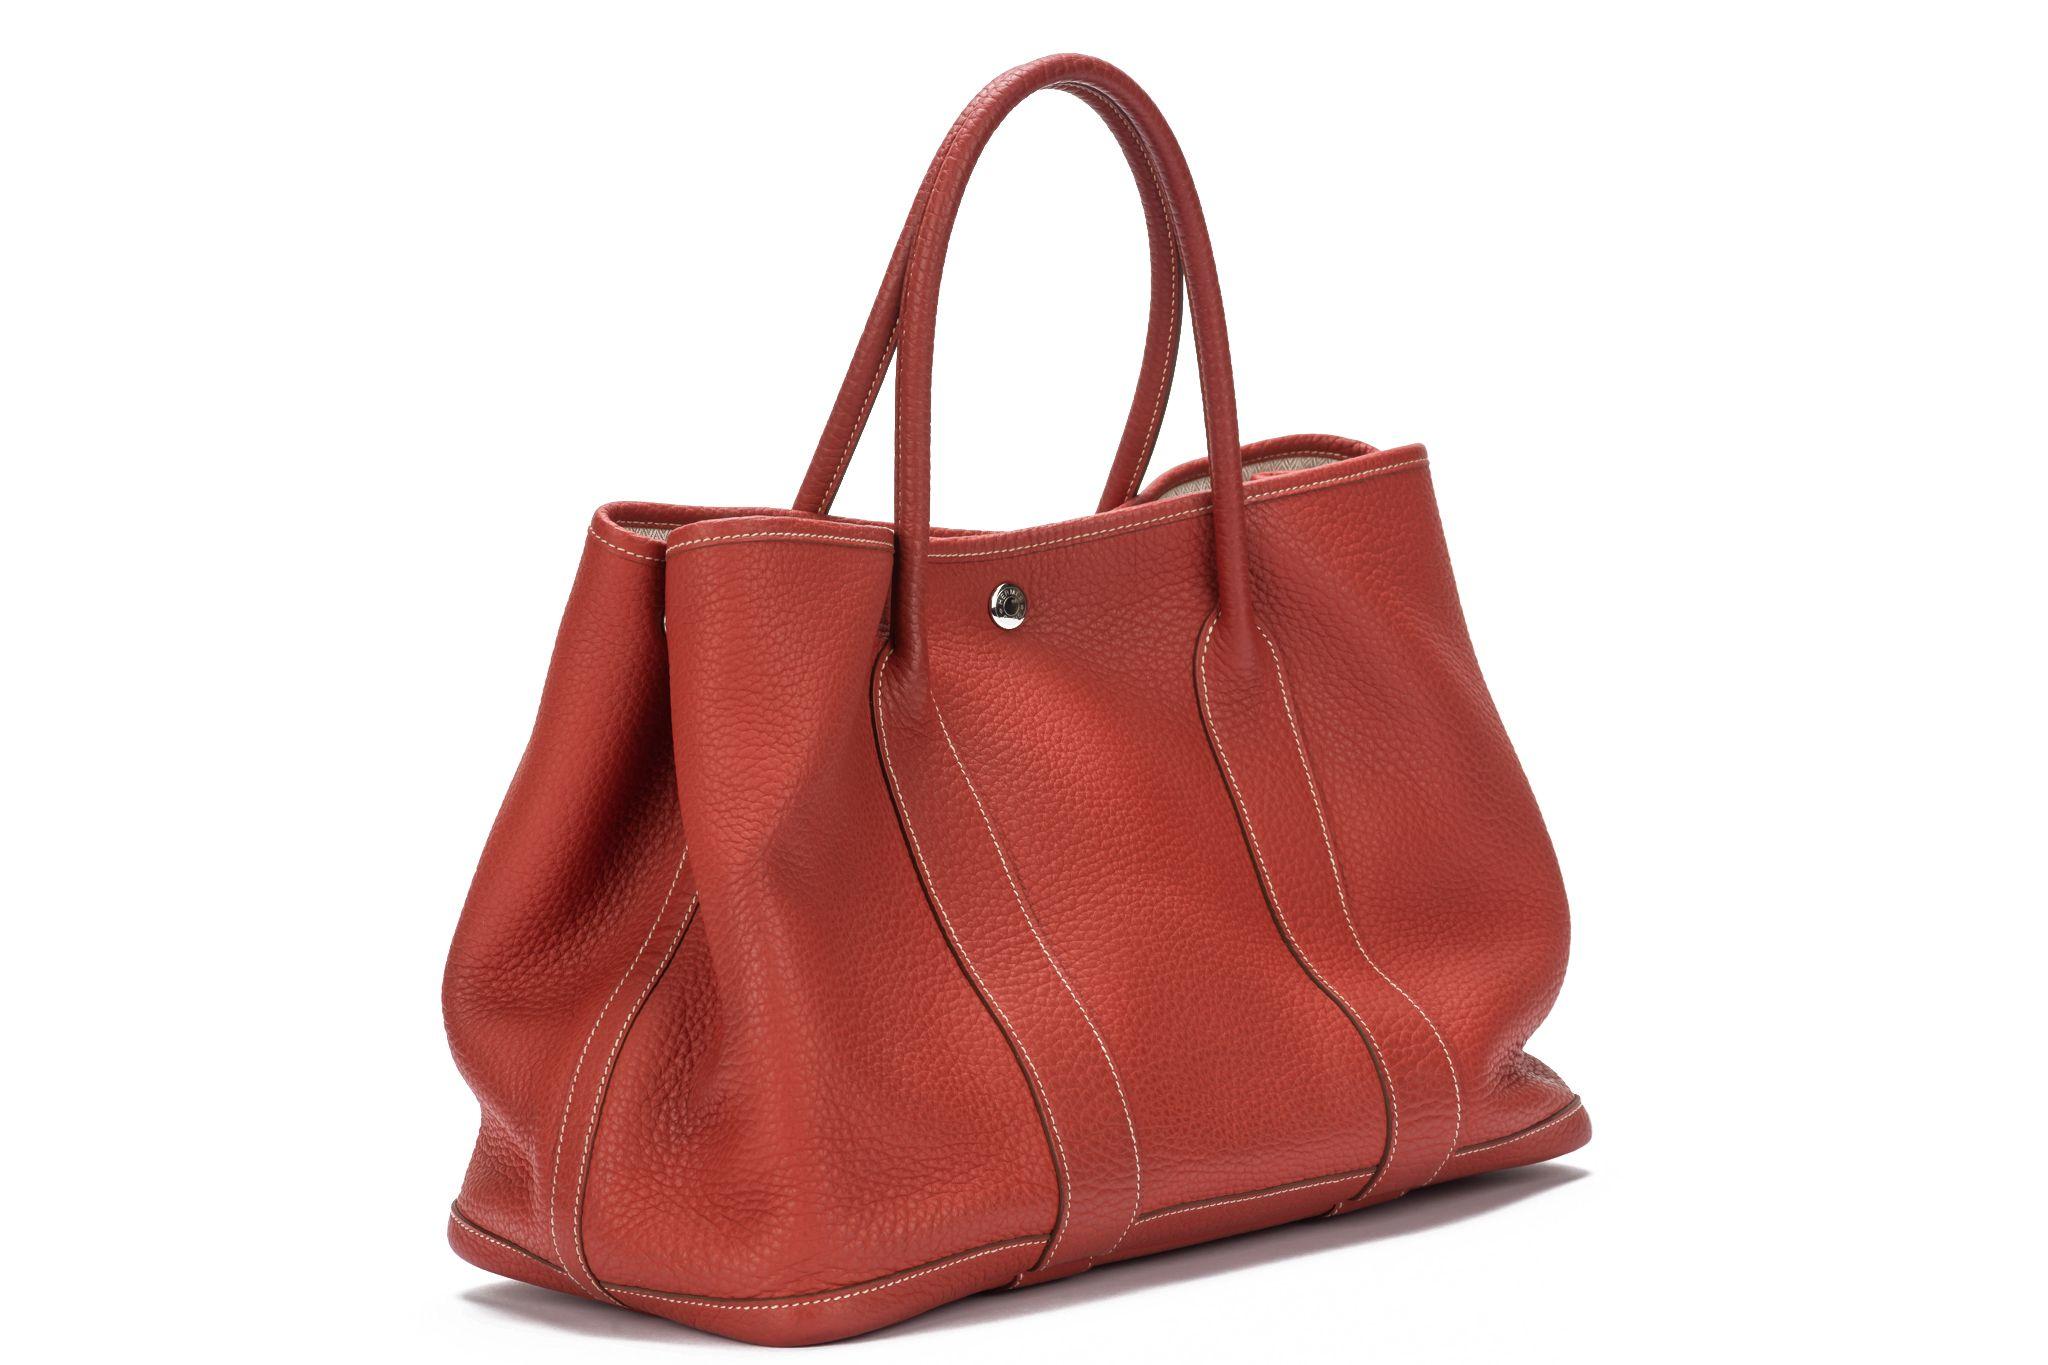 HERMÈS Garden Party bag crafted of negonda leather in the color sanguine. It's a smart bag which can be used on different occasions. The bag closes on top with a palladium hardware button and the interior is beige linen fabric. Date stamp O. The